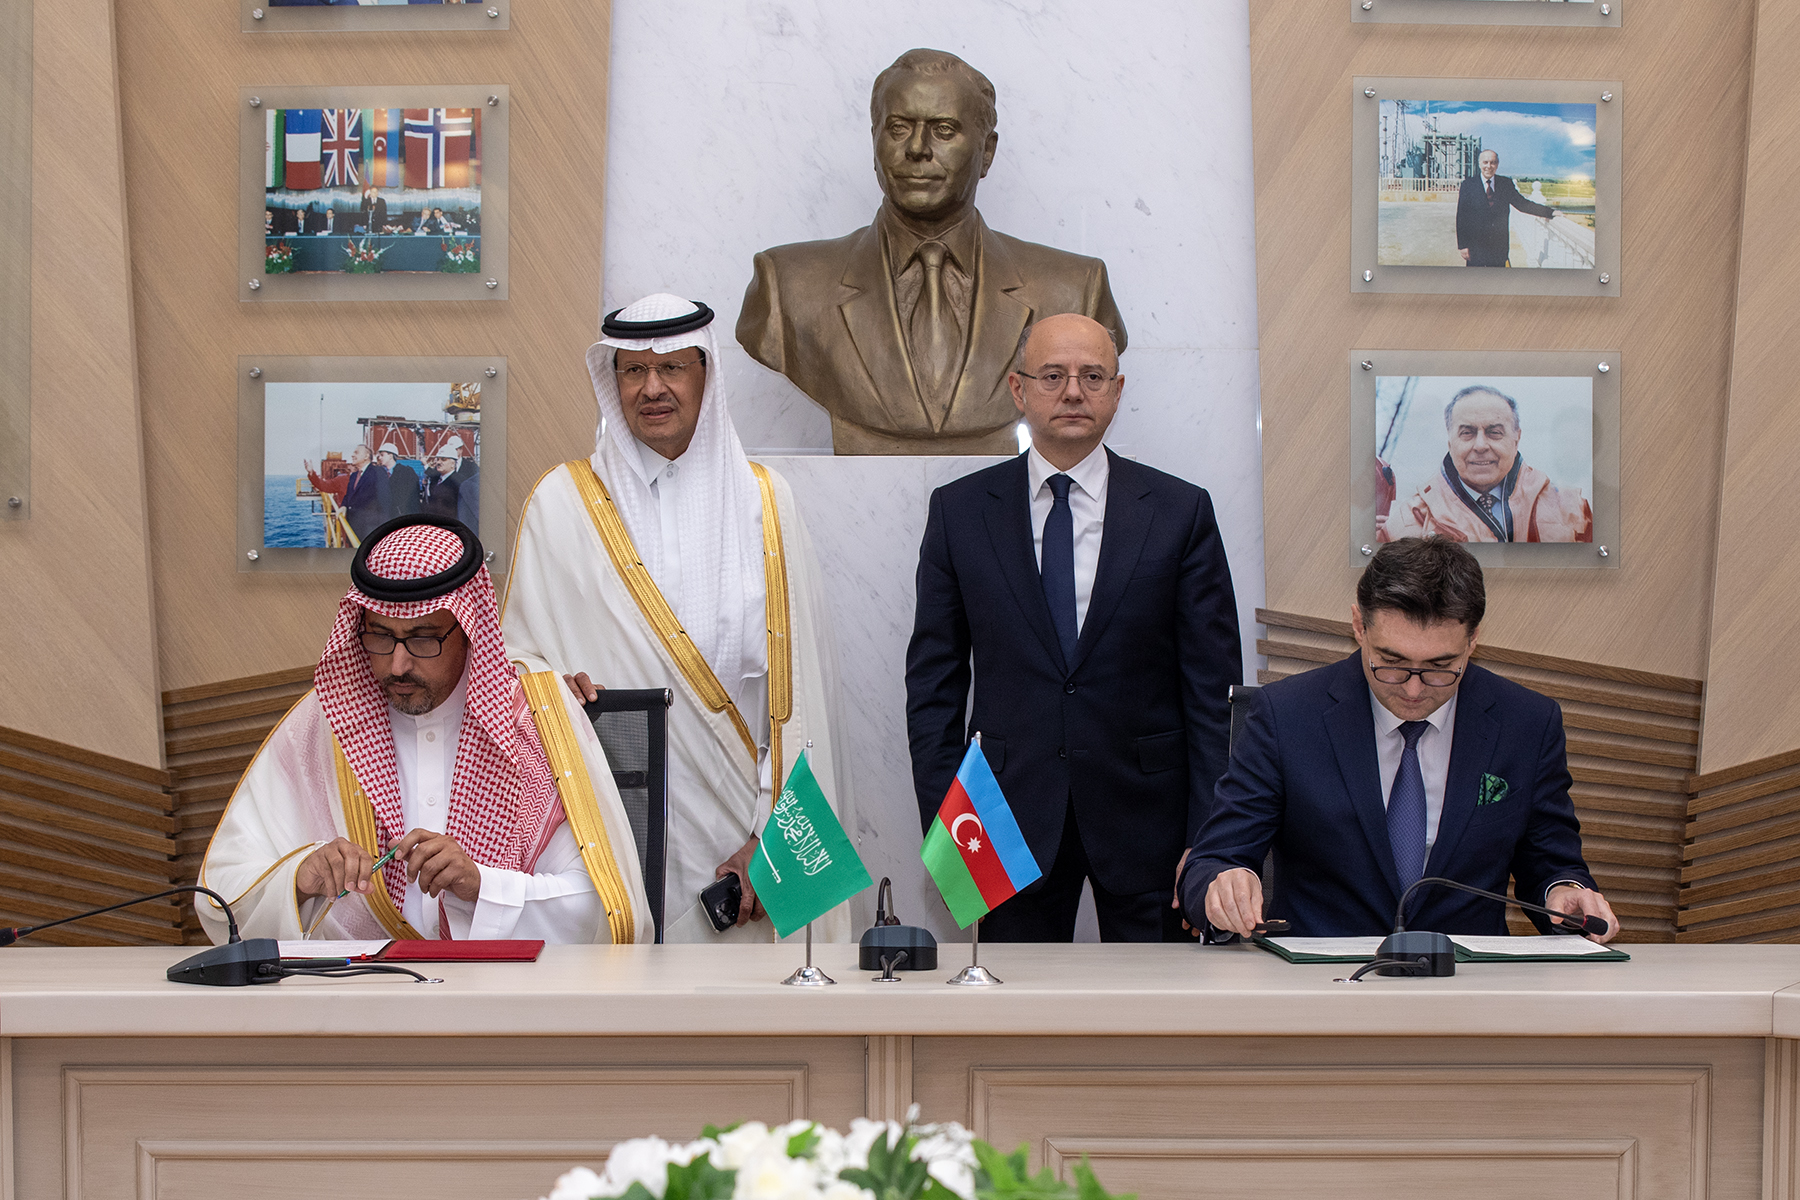 At the meeting of Energy Ministers of Azerbaijan and Saudi Arabia signed documents strengthening energy partnership